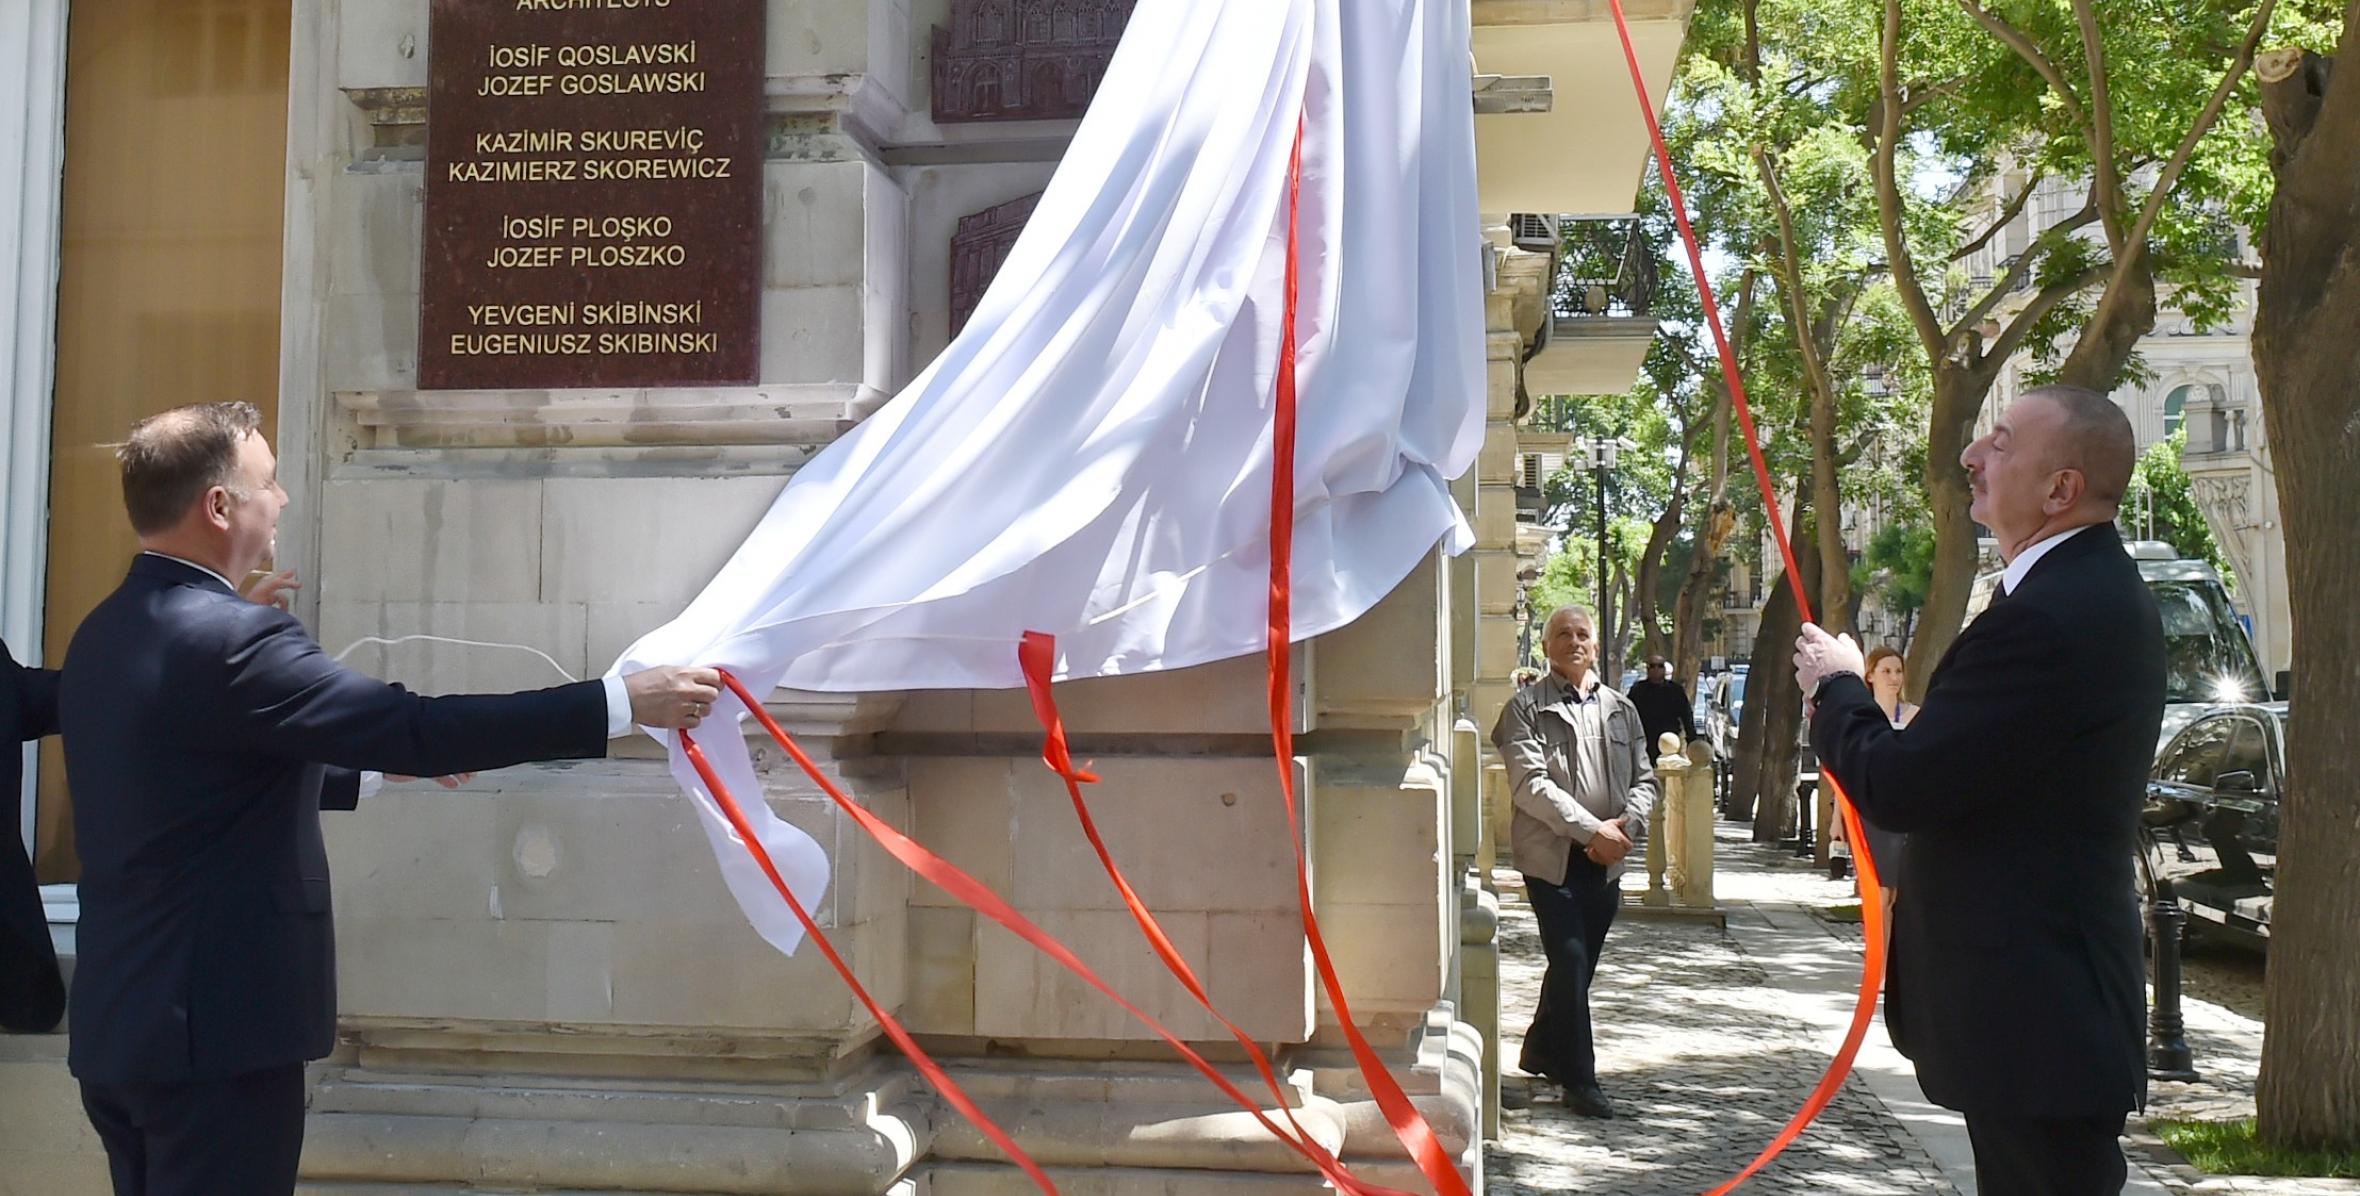 Ceremony to unveil memorial plaques commemorating Polish architects held in Baku